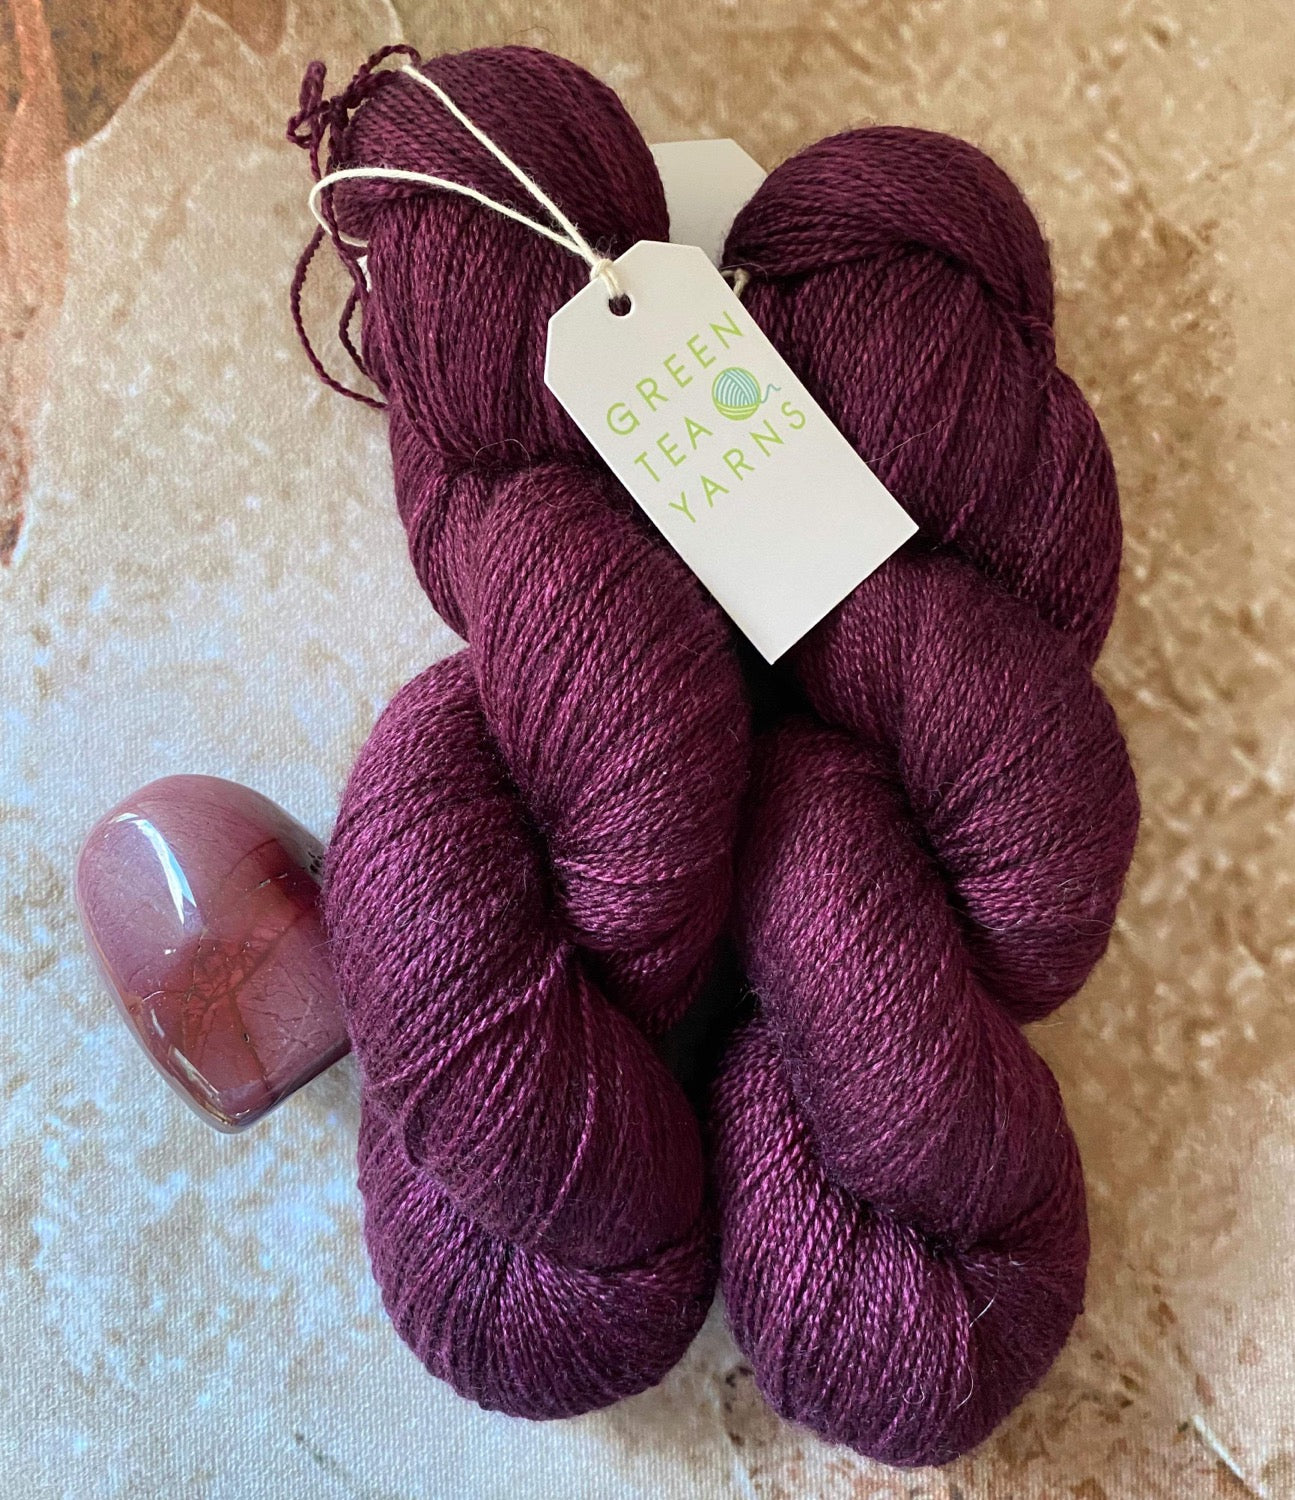 Royal Aubergine - 3 ply in Mulberry silk and BFL